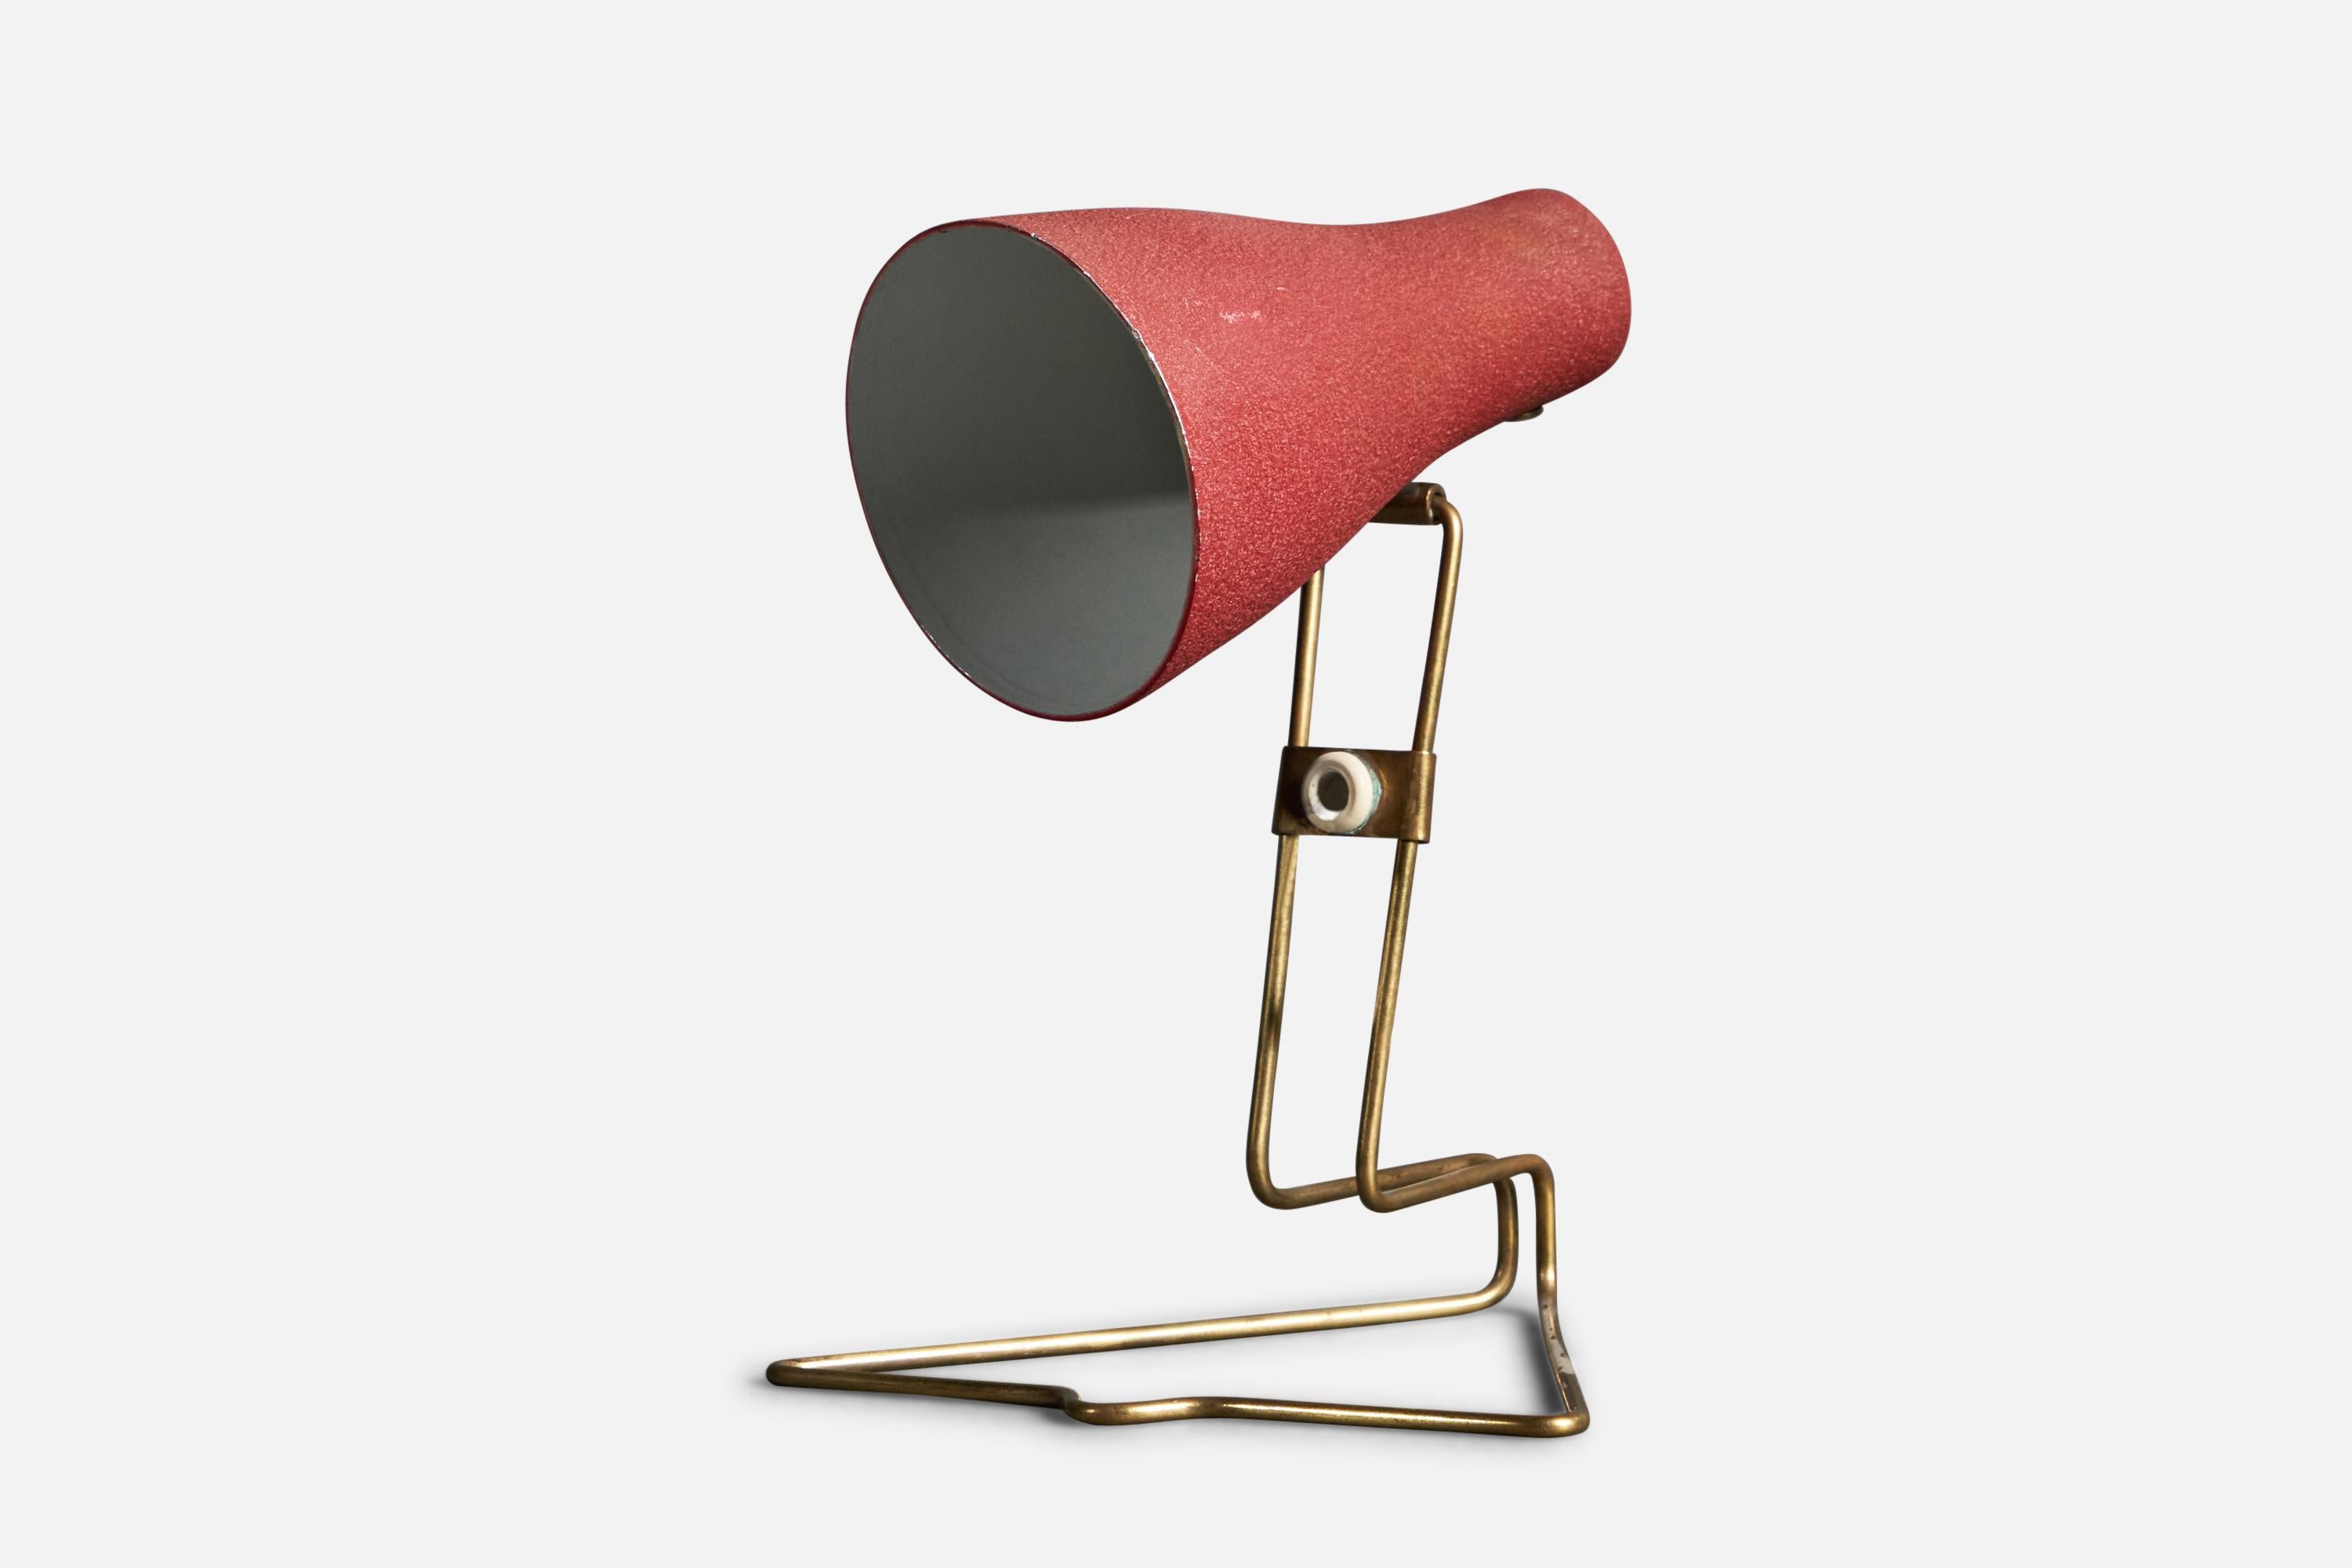 An adjustable wall light or table lamp. Designed and produced by Böhlmarks, Sweden, 1950s. In brass and red-lacquered metal. 

Other designers of the period include Jean Royere, Paolo Buffa, Gino Sarfatti, Hans Bergström, and Paavo Tynell.